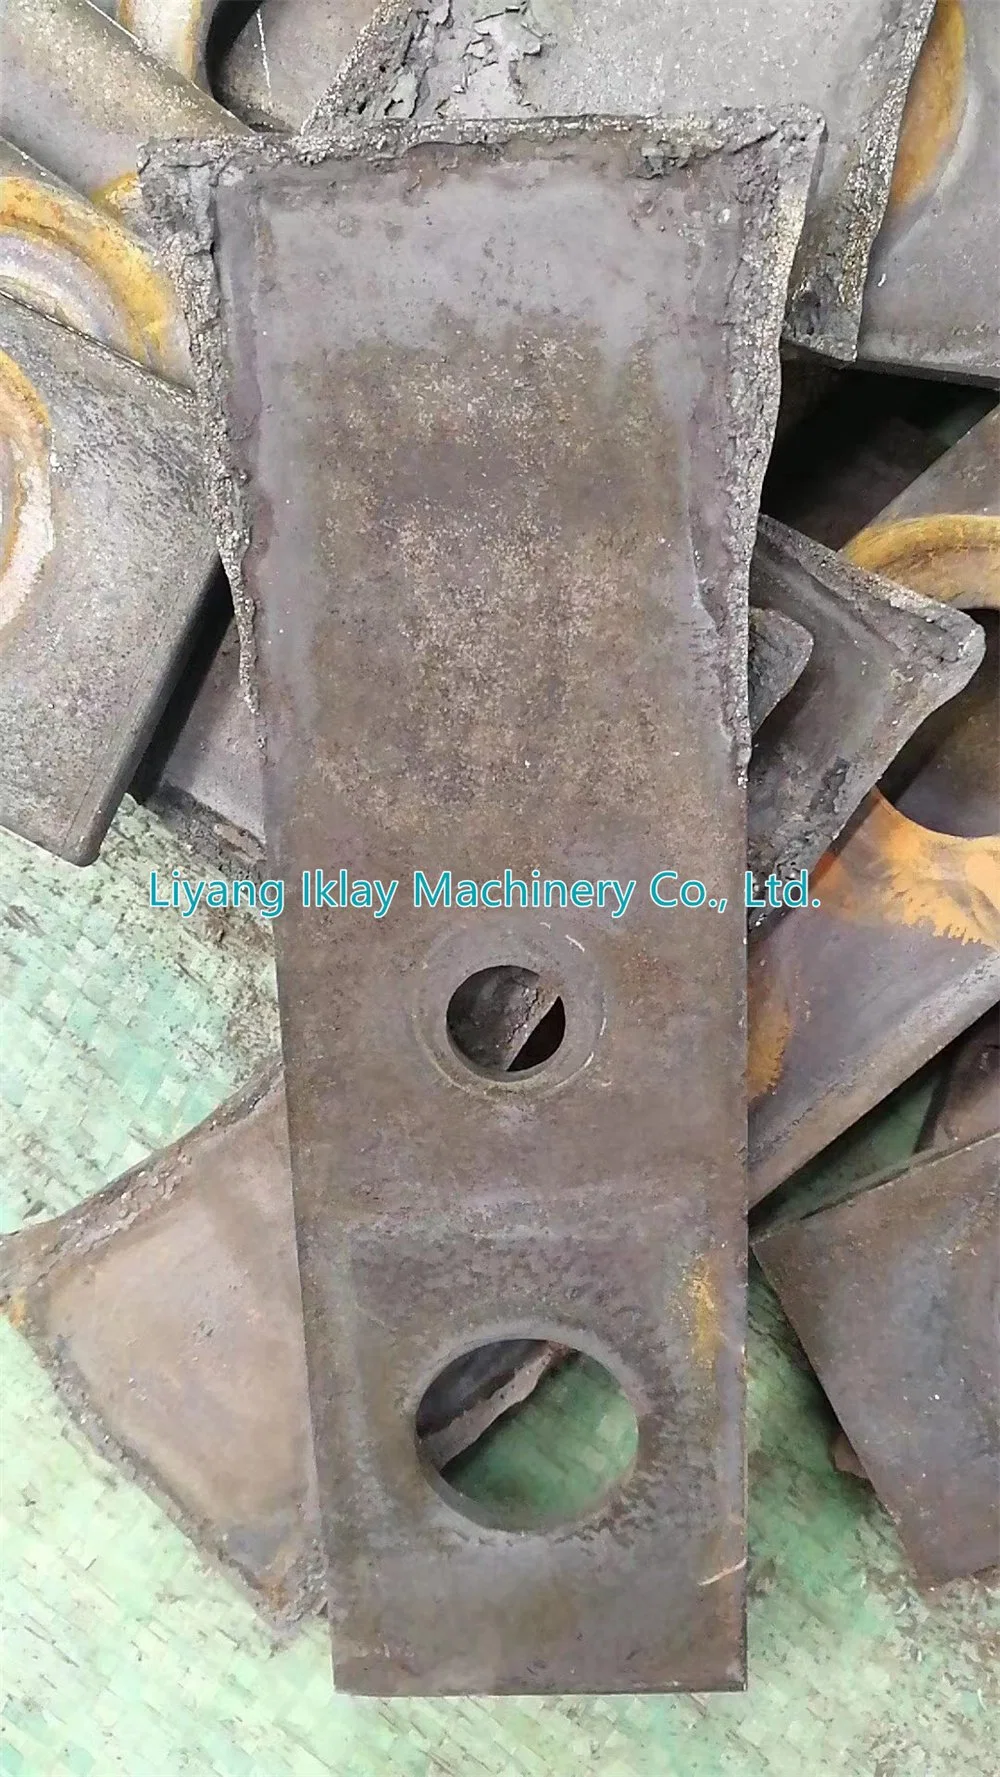 Customize Any Grinder Machine Spare Parts Knives Crusher Machine Hammer Blades